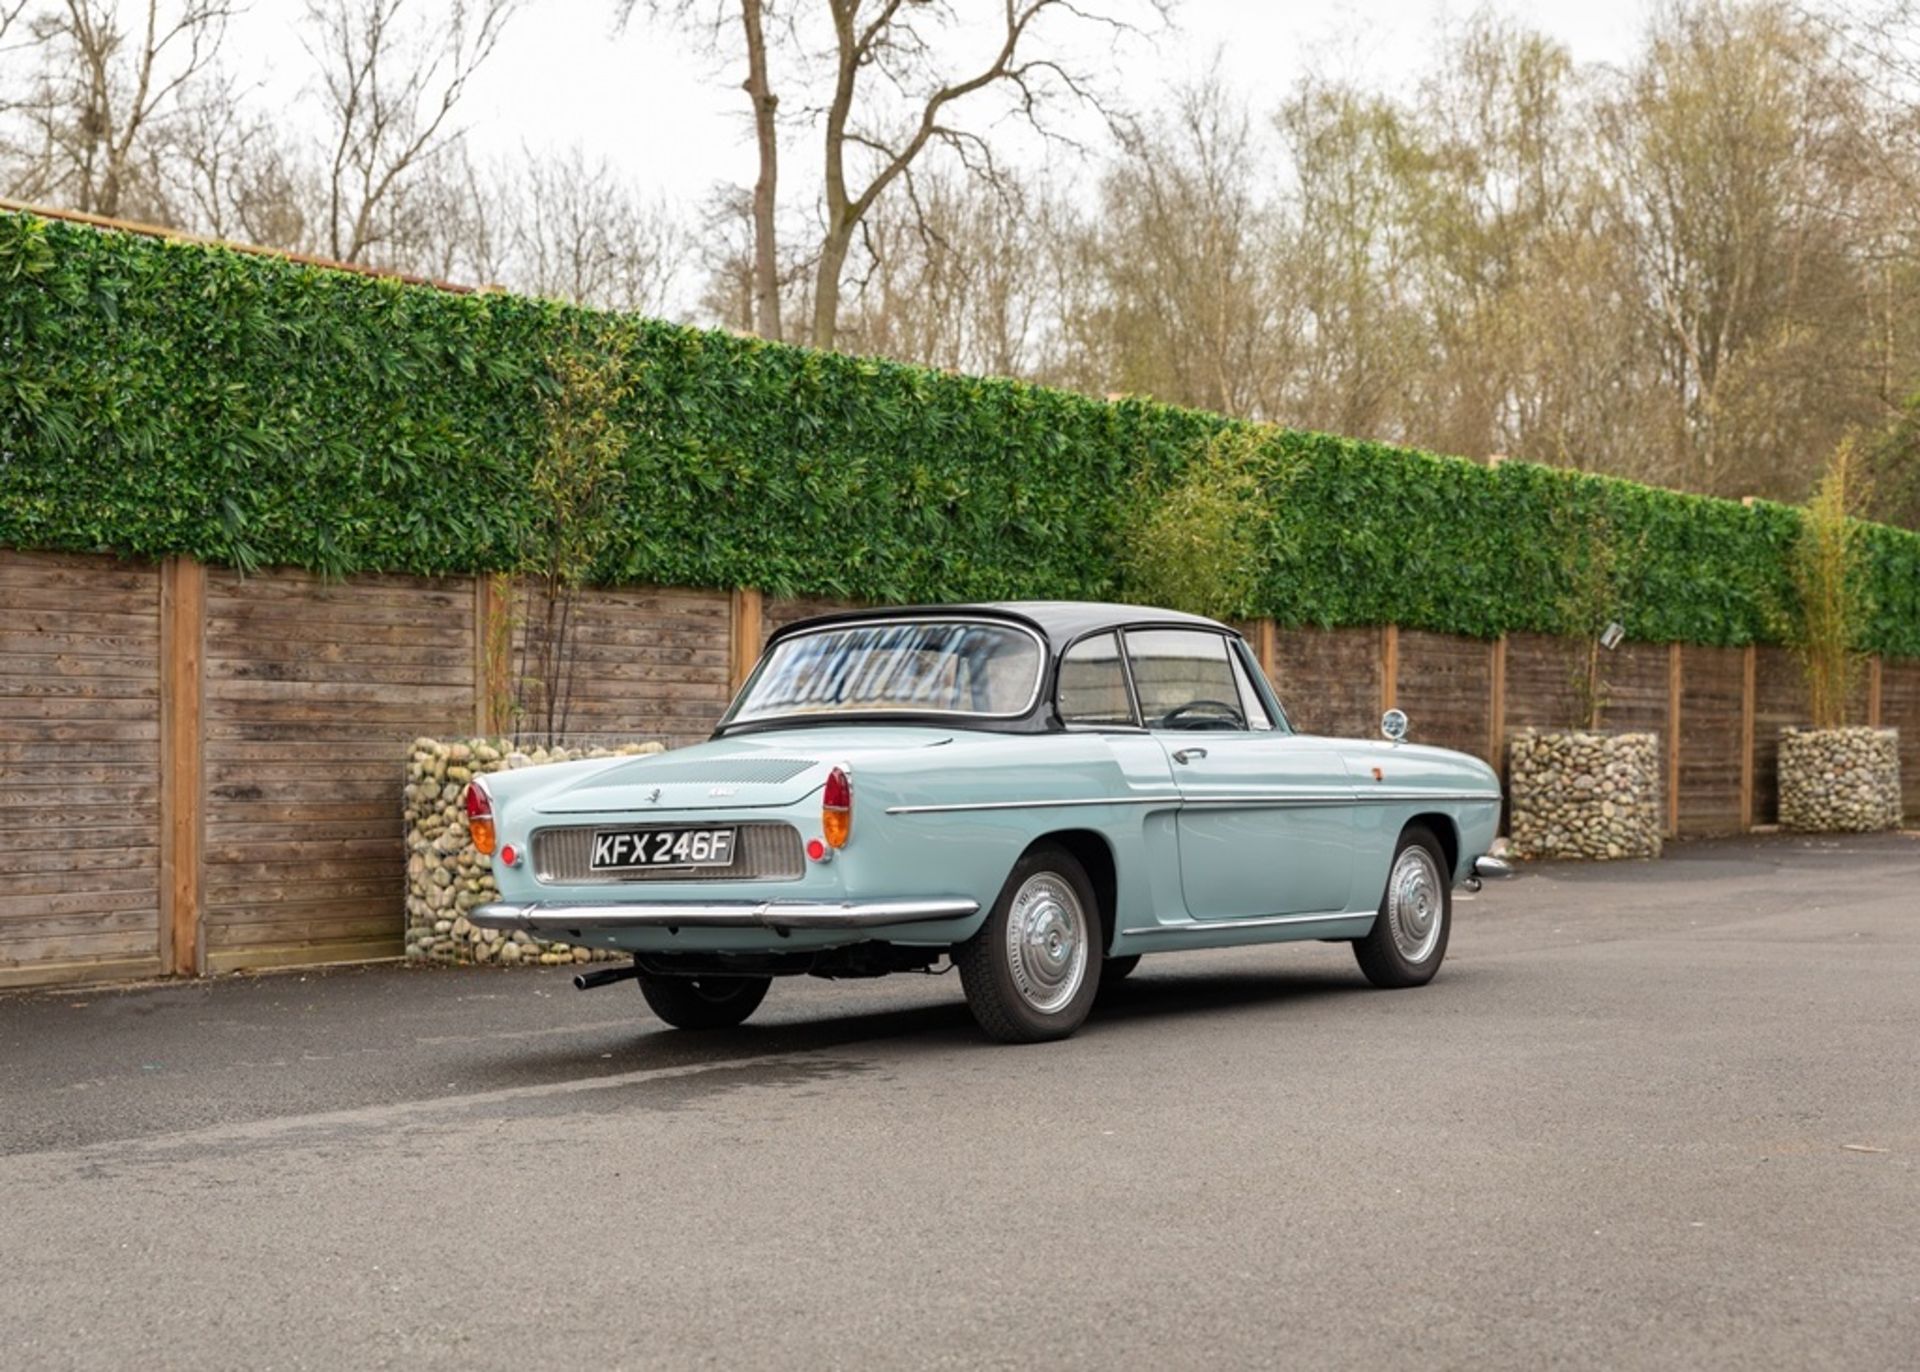 1968 Renault Caravelle Convertible - Image 17 of 20